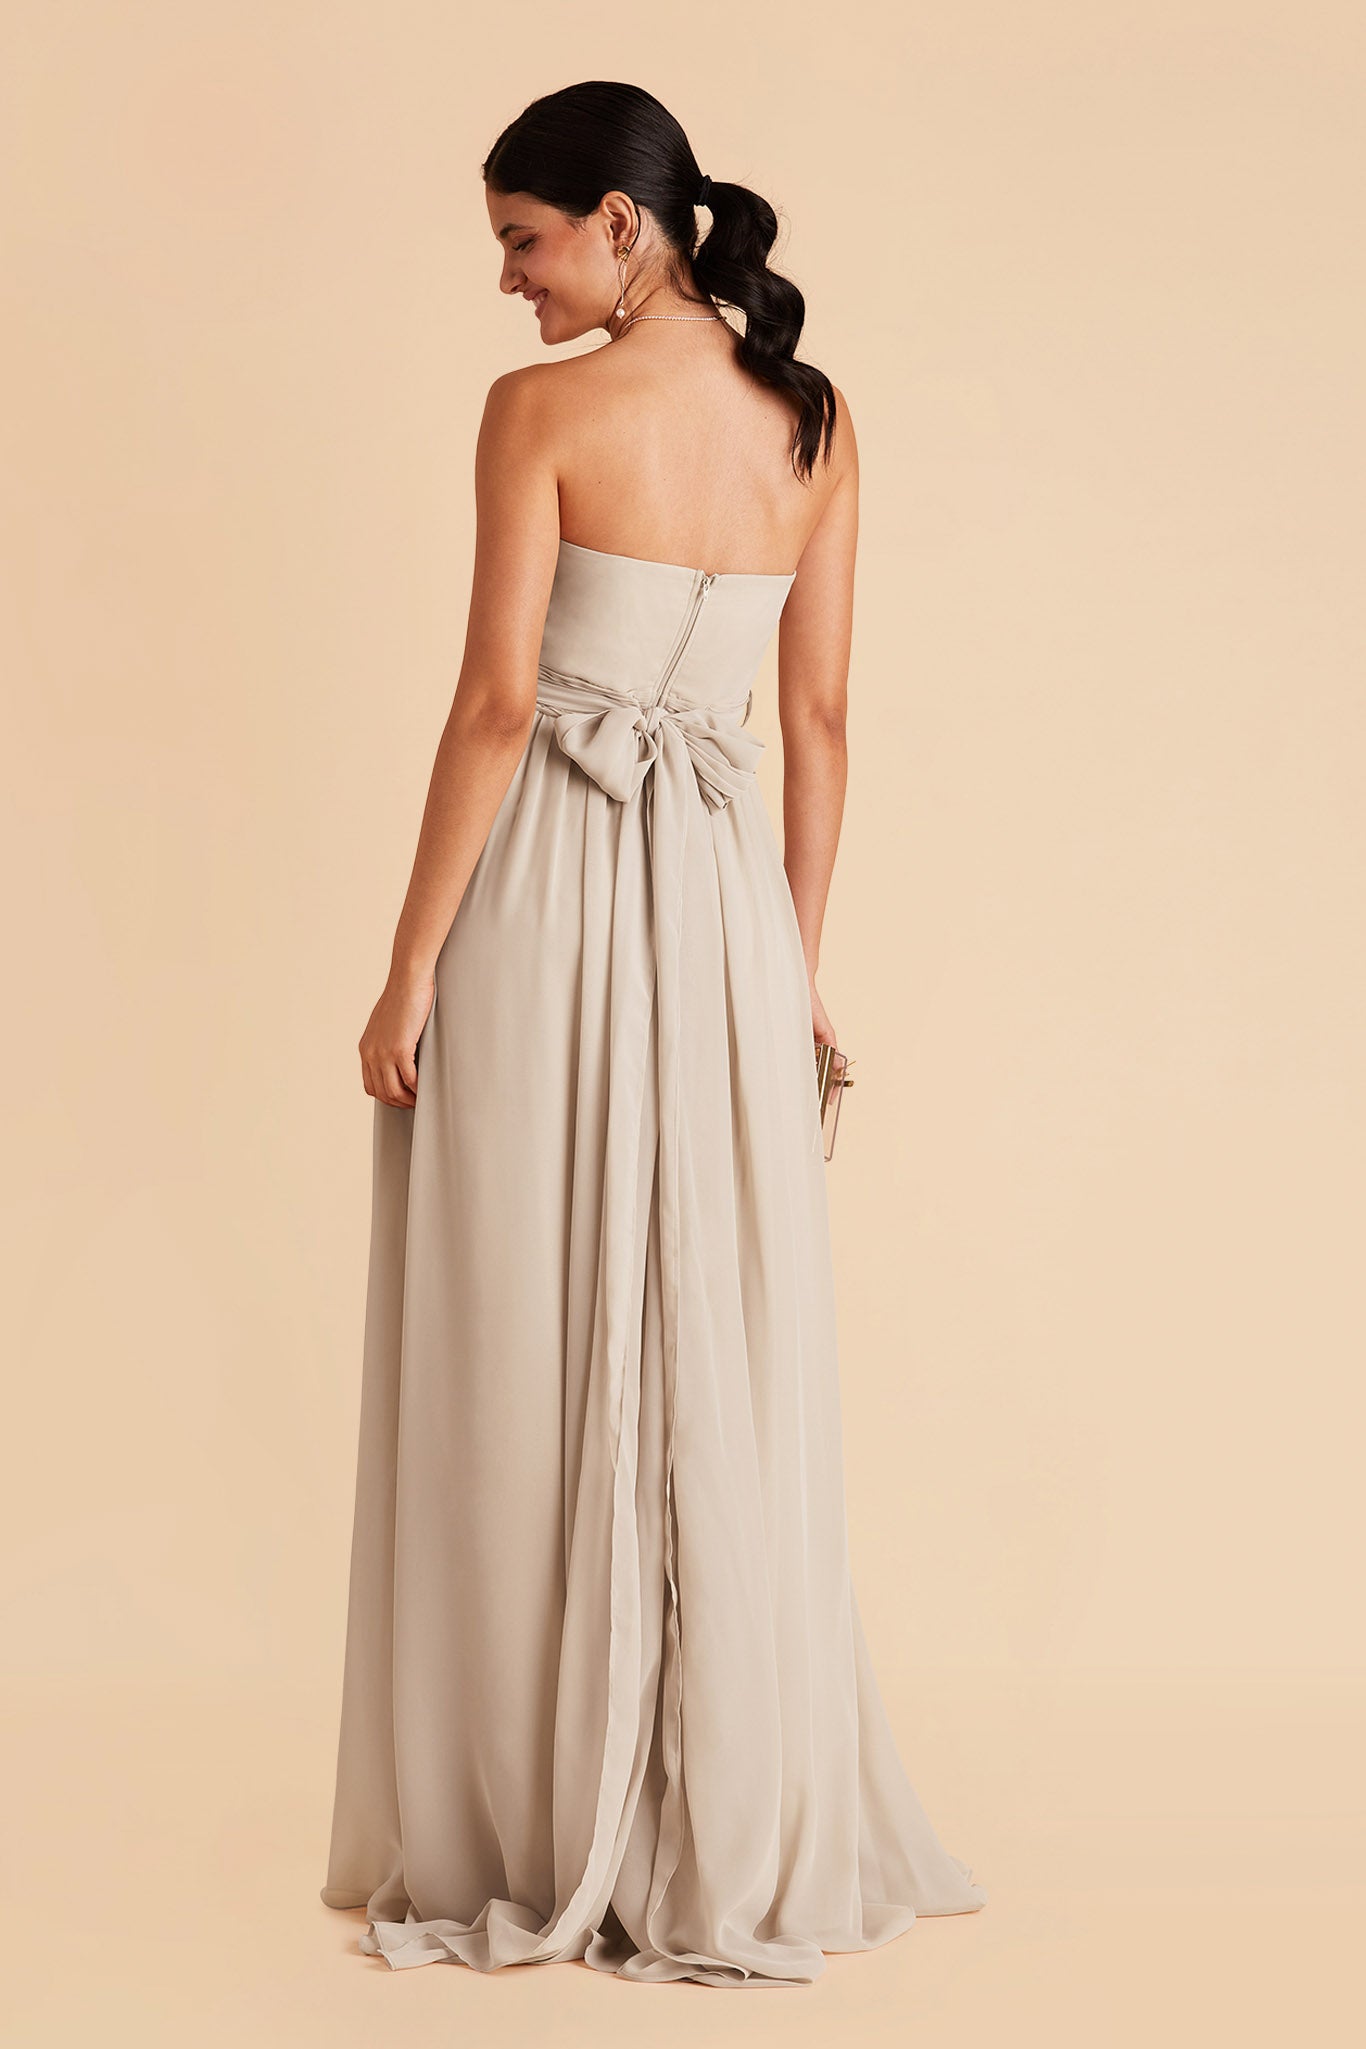 Grace convertible bridesmaid dress in Neutral Champagne Chiffon by Birdy Grey, back view